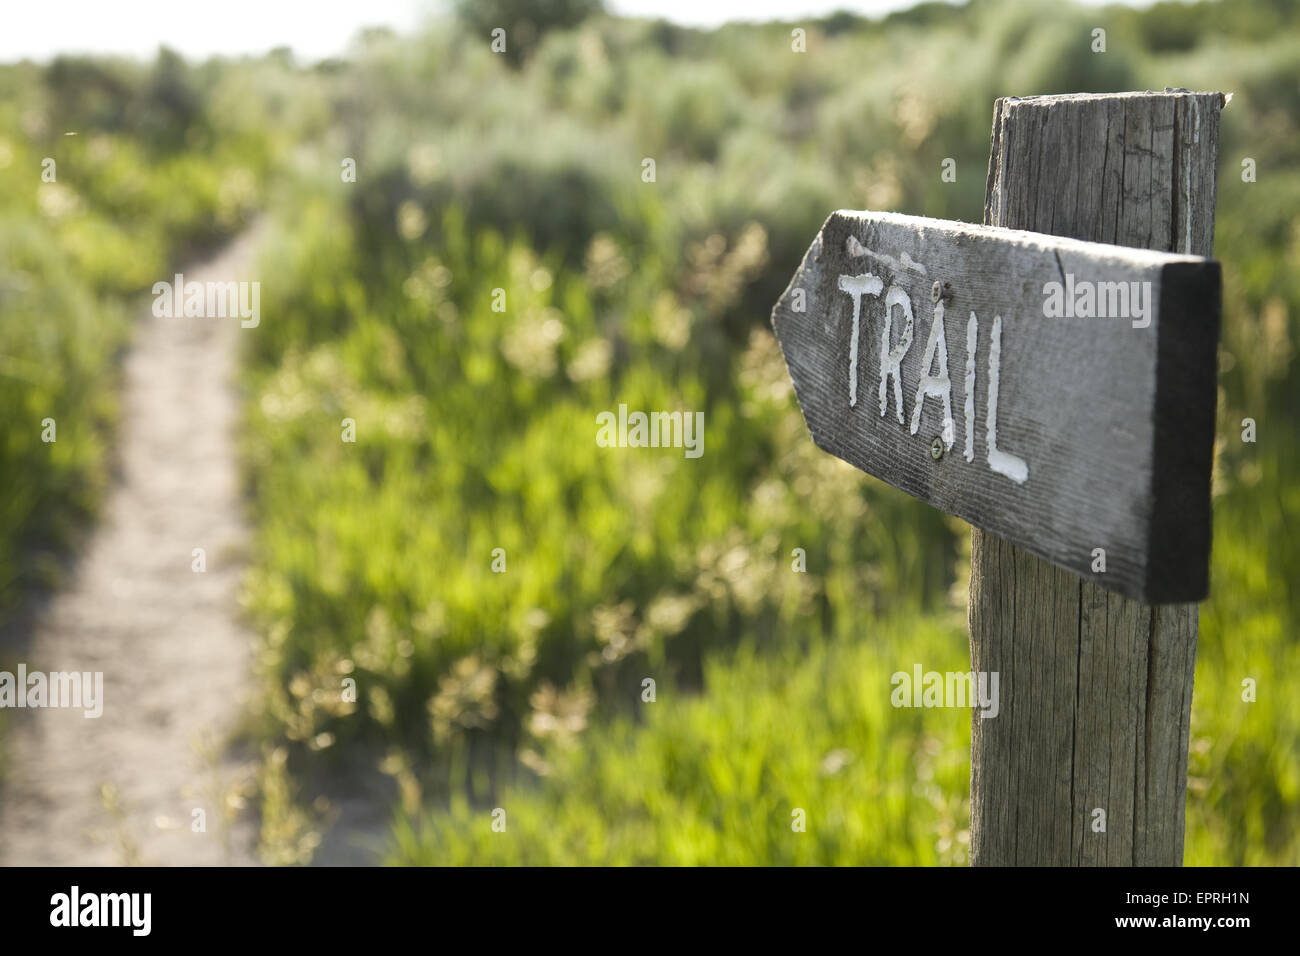 Trail sign. Stock Photo